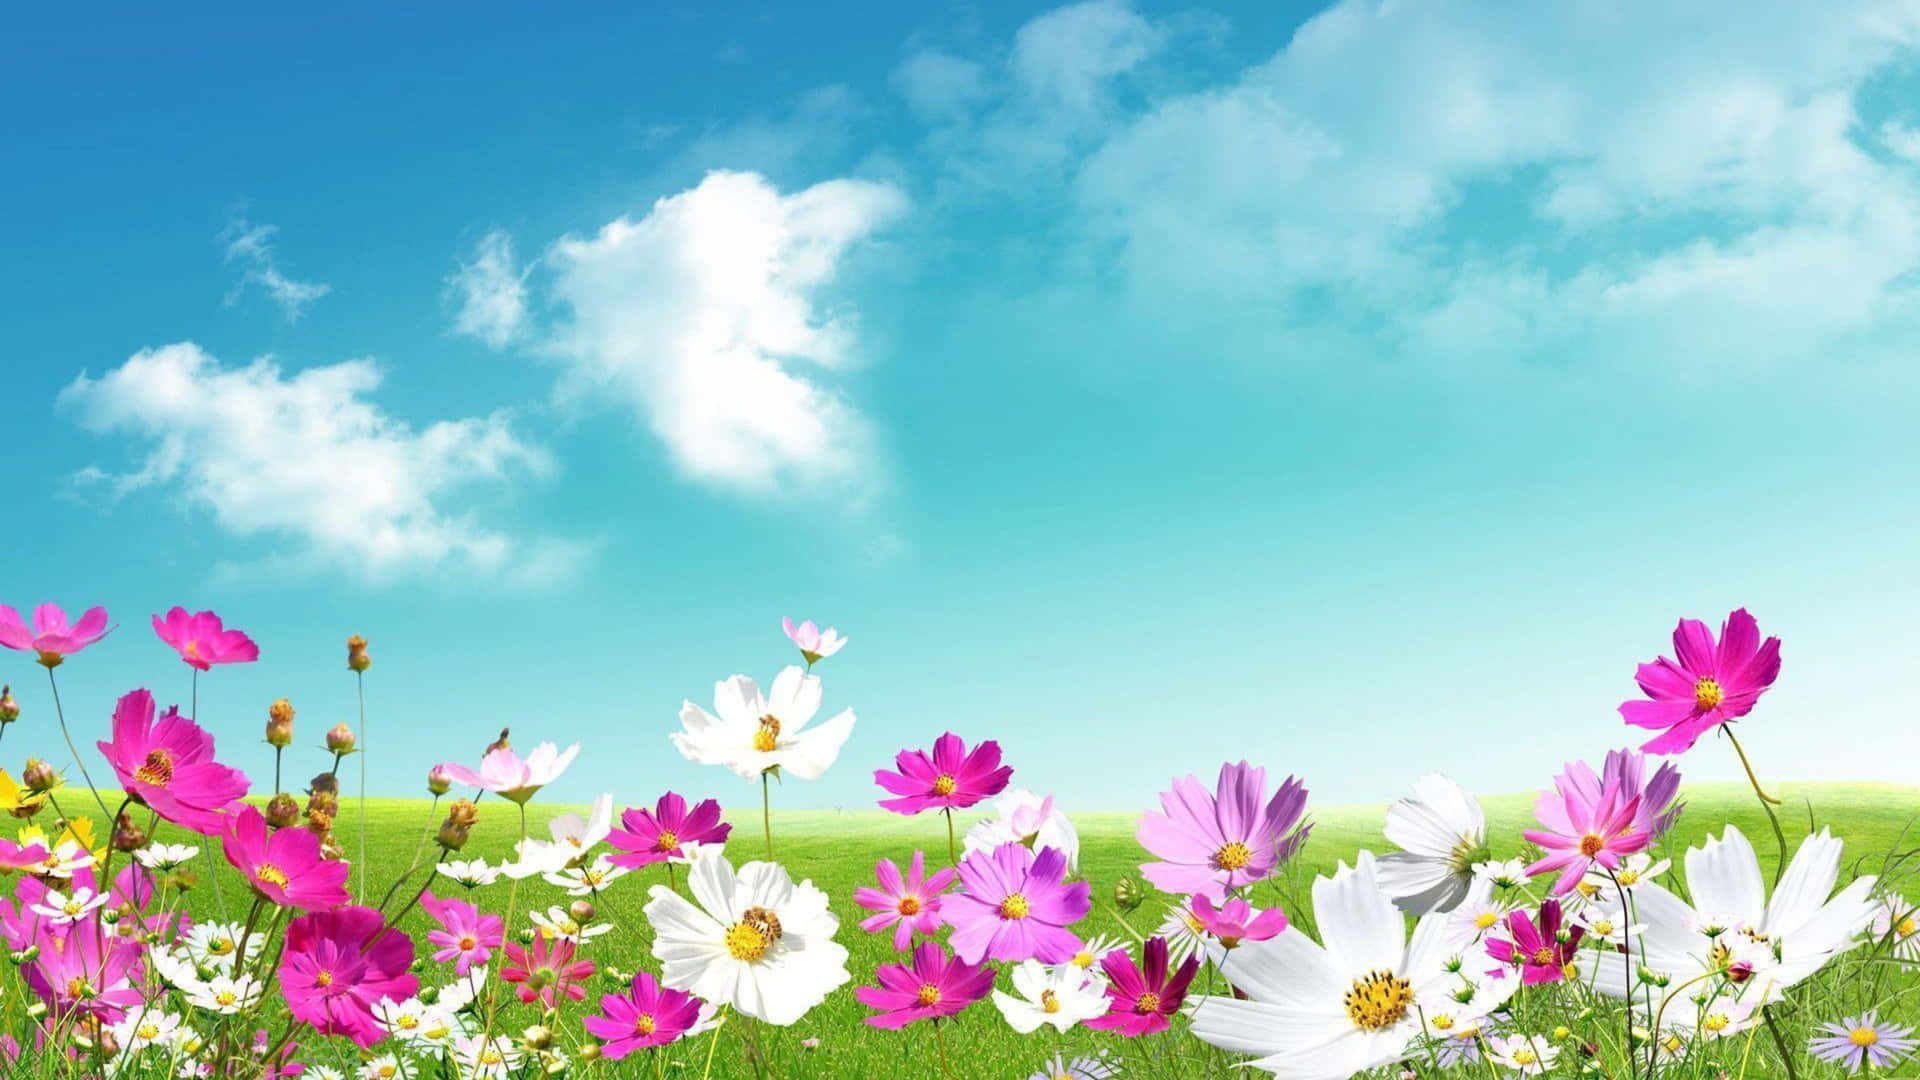 A Field Of Flowers With A Blue Sky